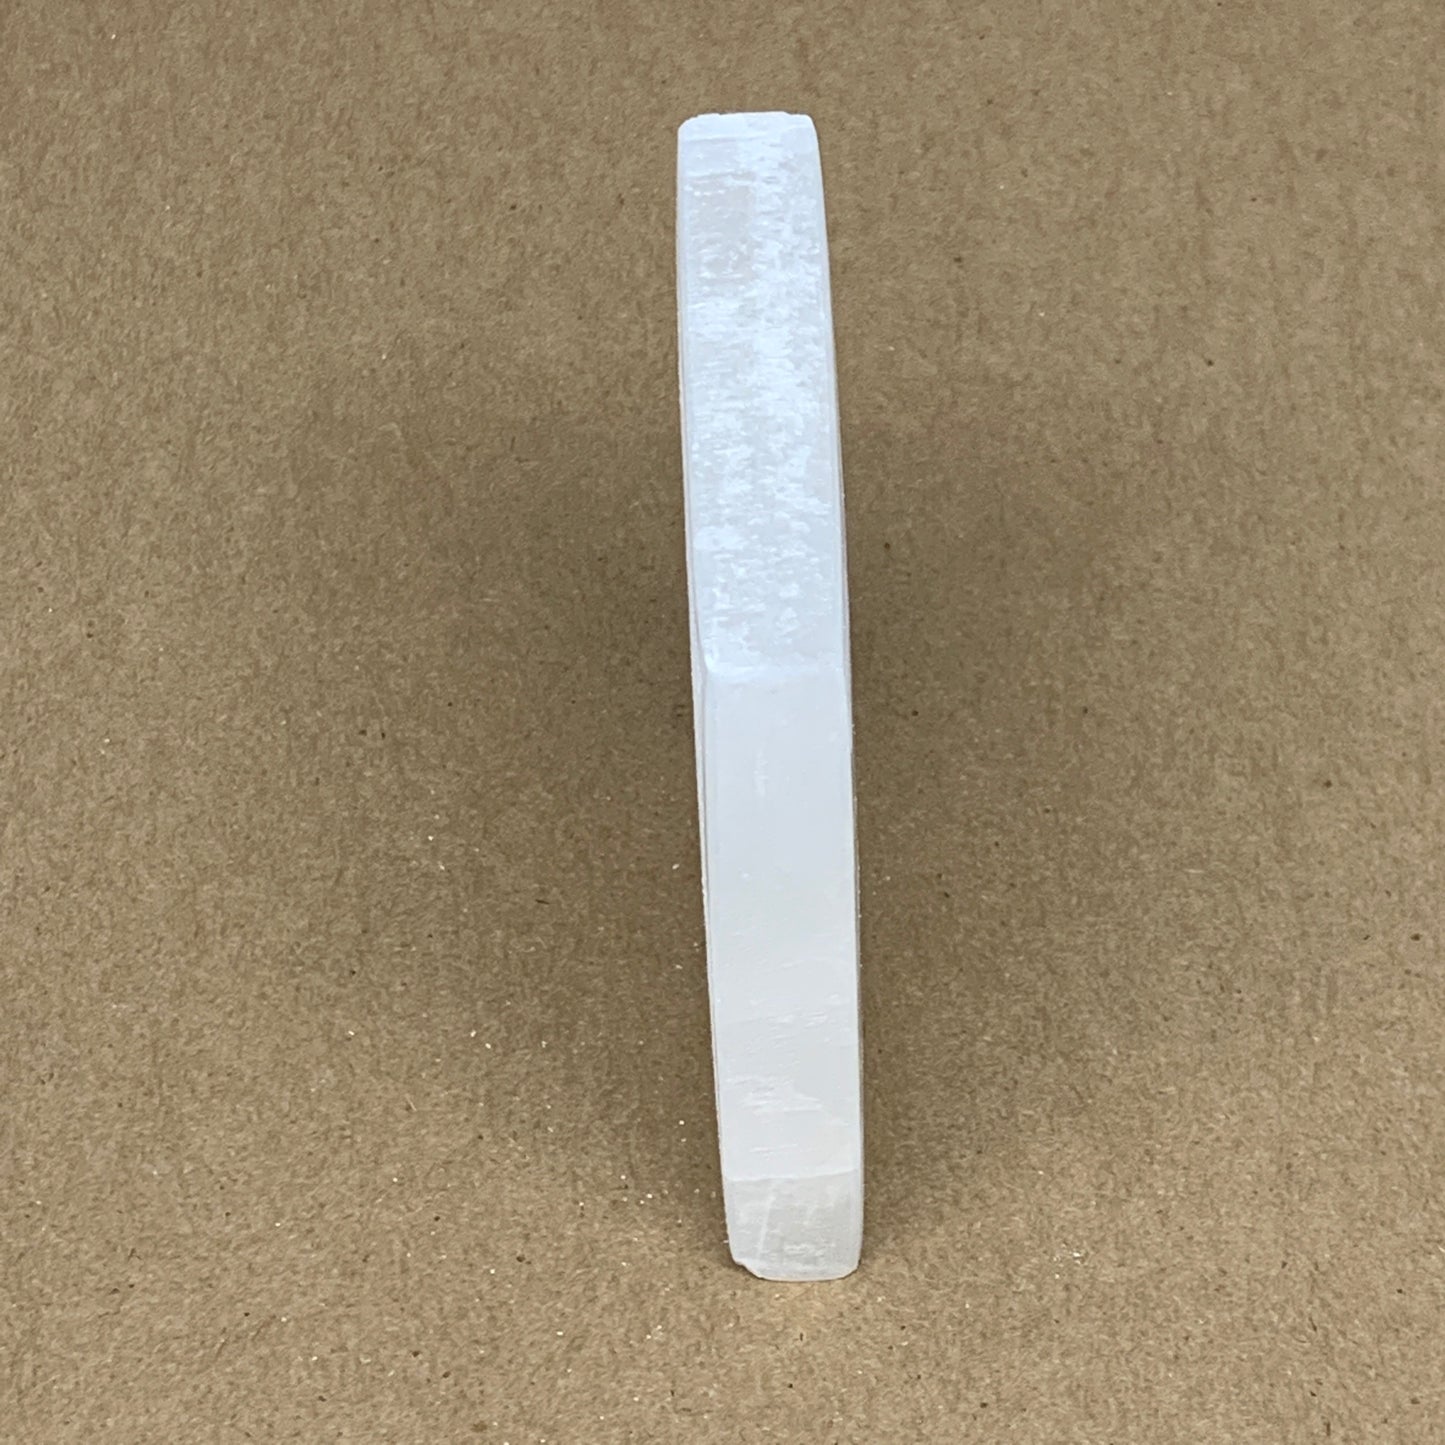 1pcs, 3.2" Natural Selenite Crystals Carved Square gypsum @Morocco